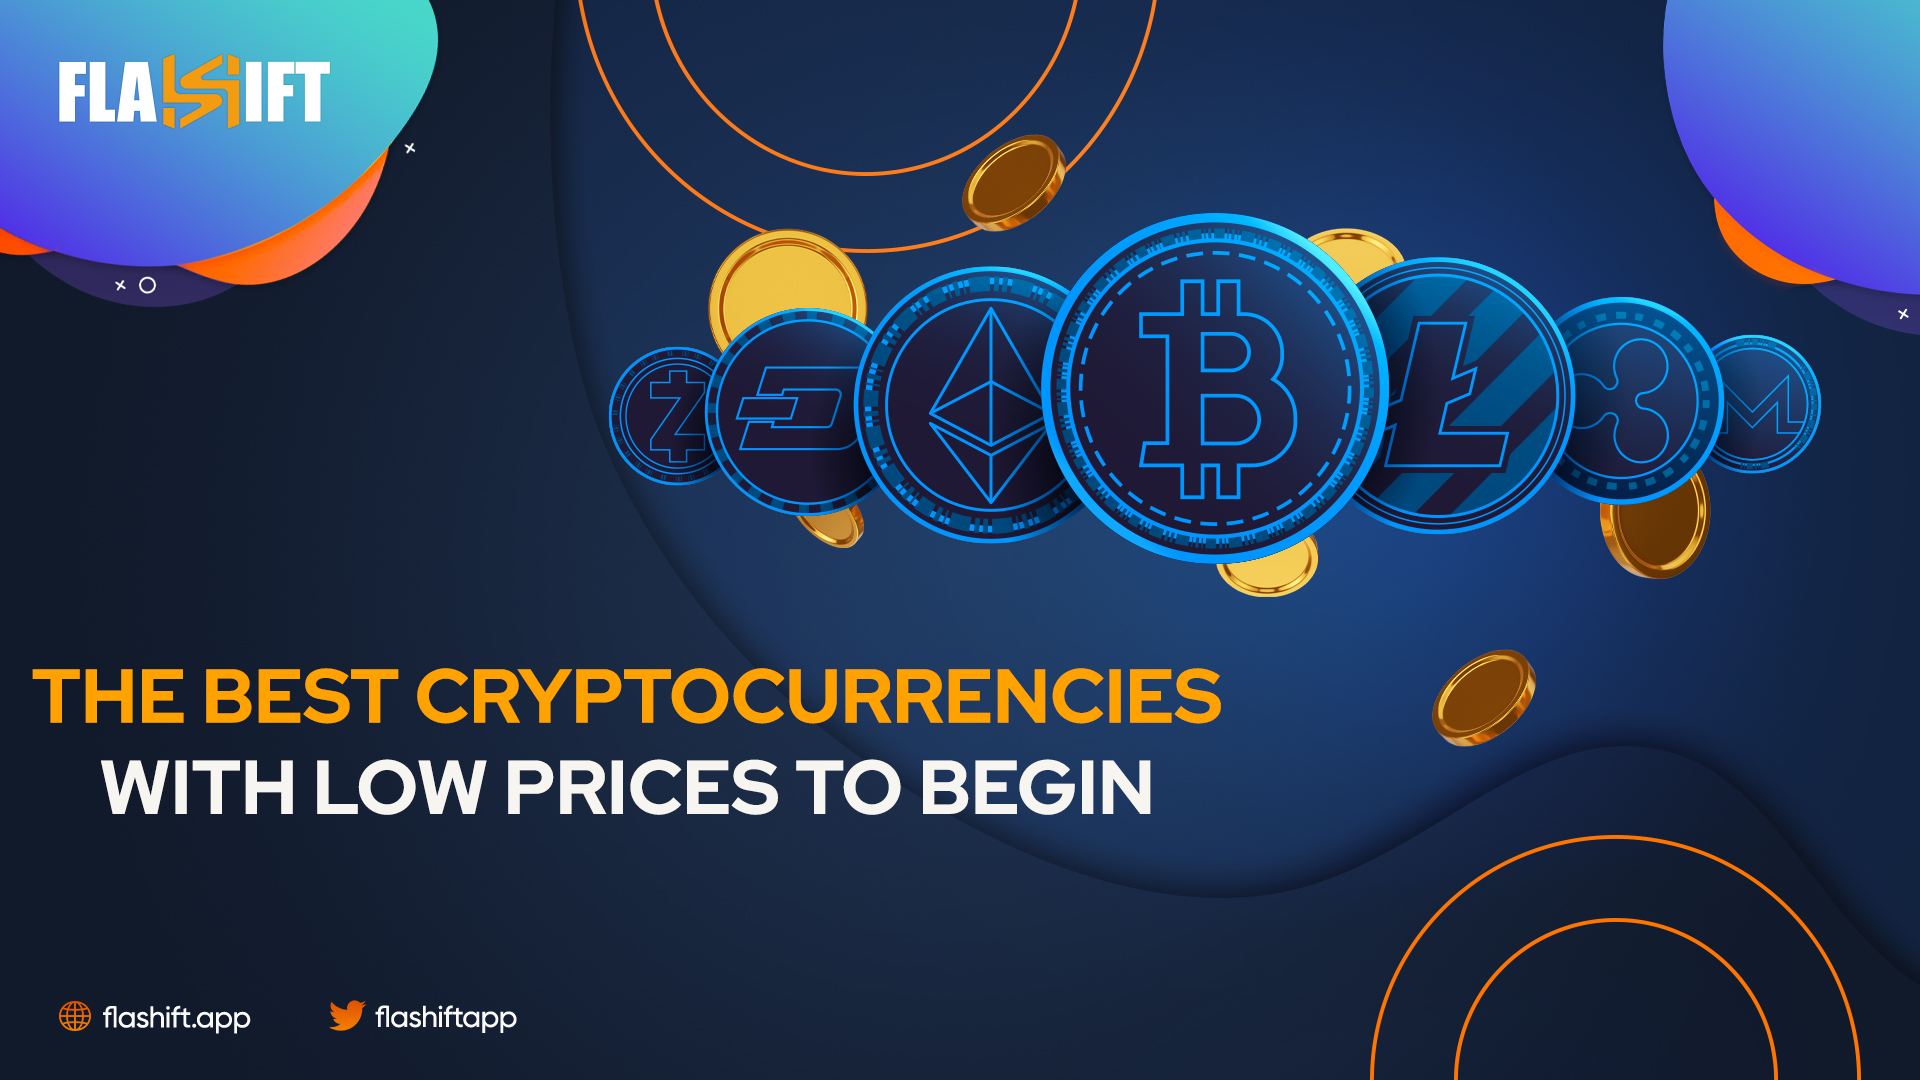 The best cryptocurrencies with low prices to begin